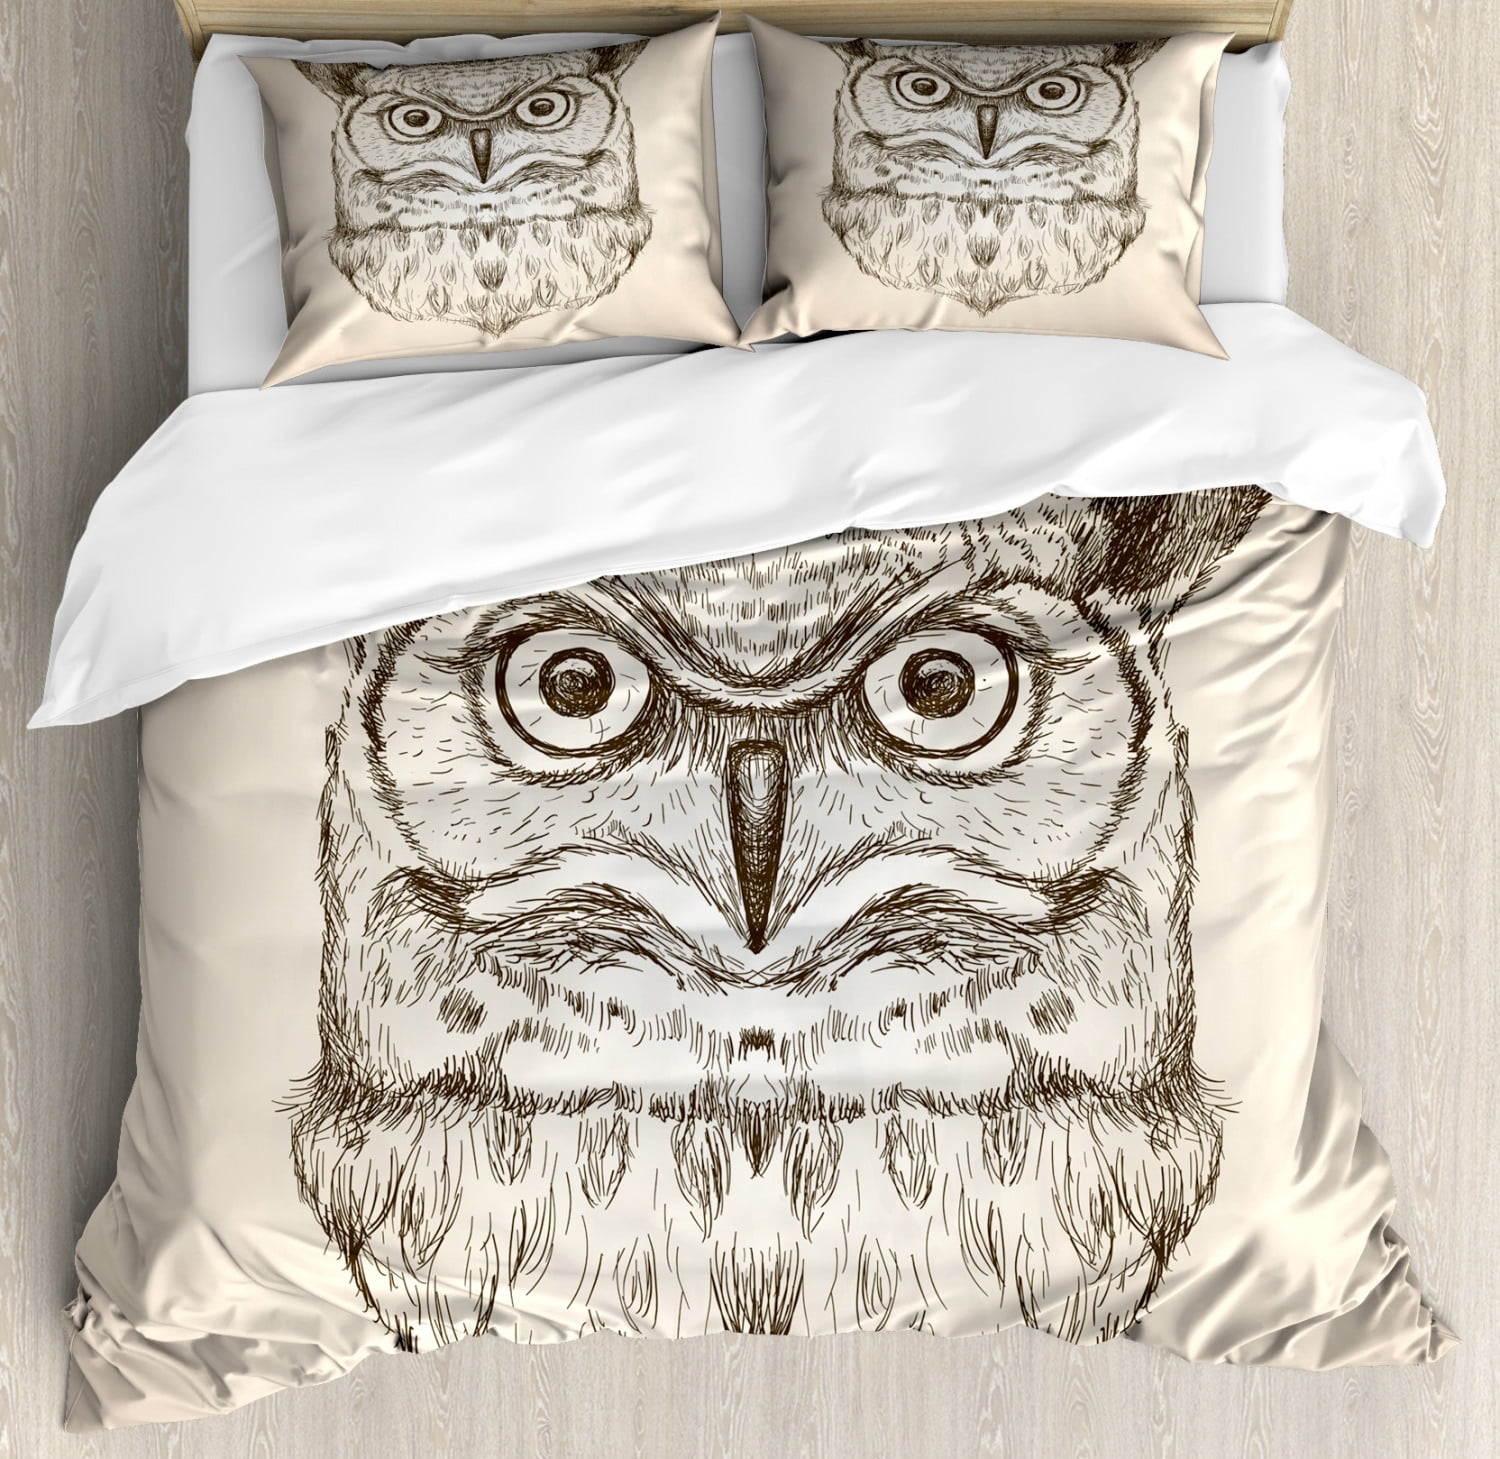 Owl King Size Duvet Cover Set Hand Drawn Artistic Sketch Of An